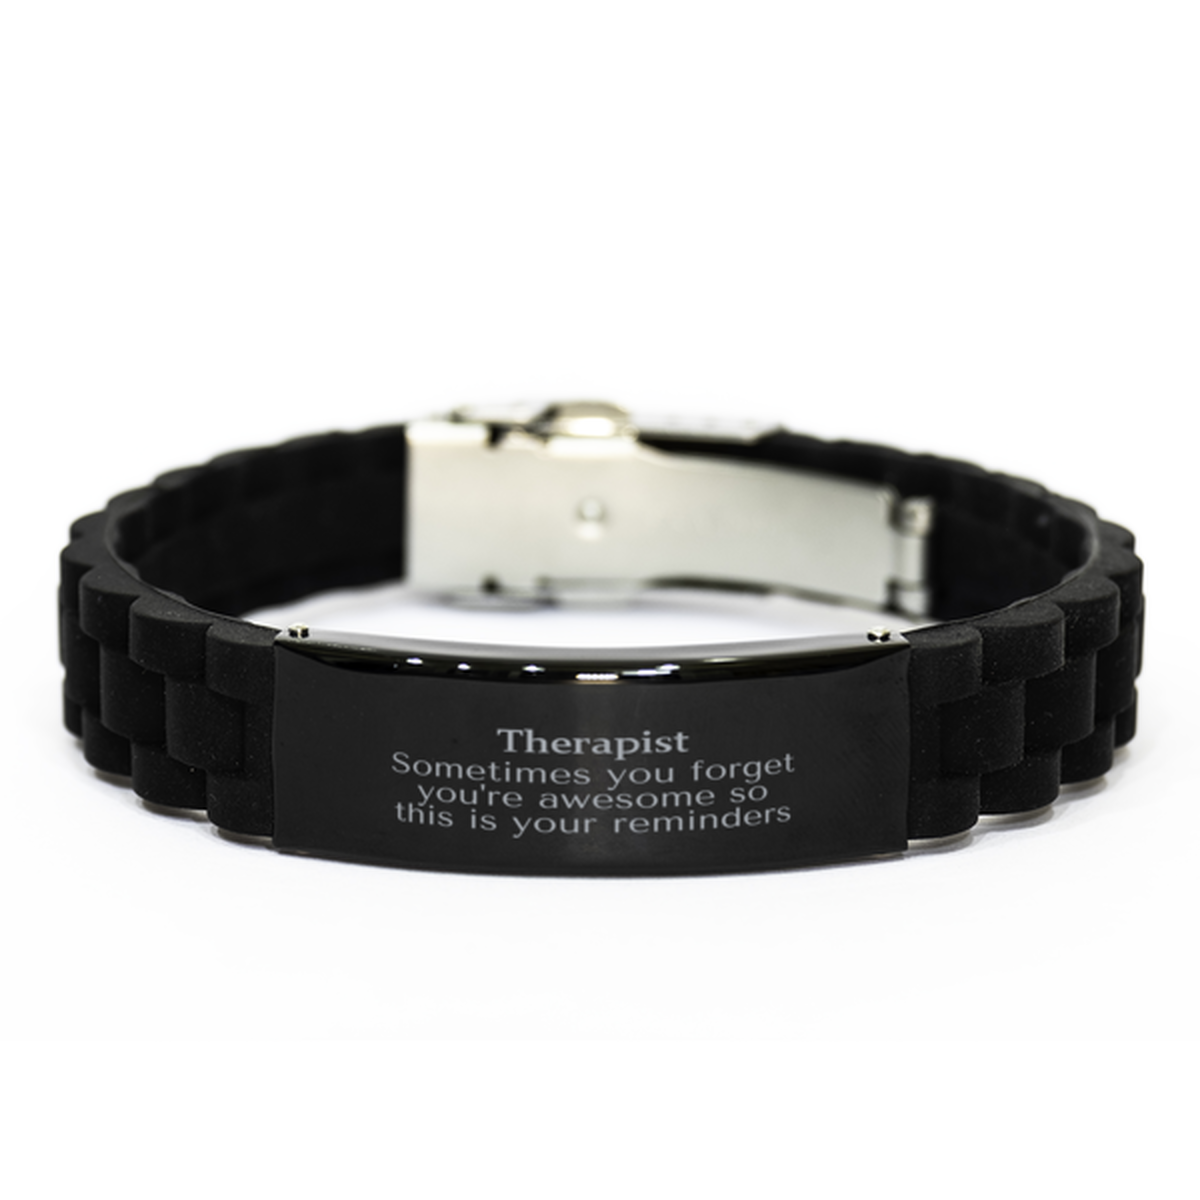 Sentimental Therapist Black Glidelock Clasp Bracelet, Therapist Sometimes you forget you're awesome so this is your reminders, Graduation Christmas Birthday Gifts for Therapist, Men, Women, Coworkers